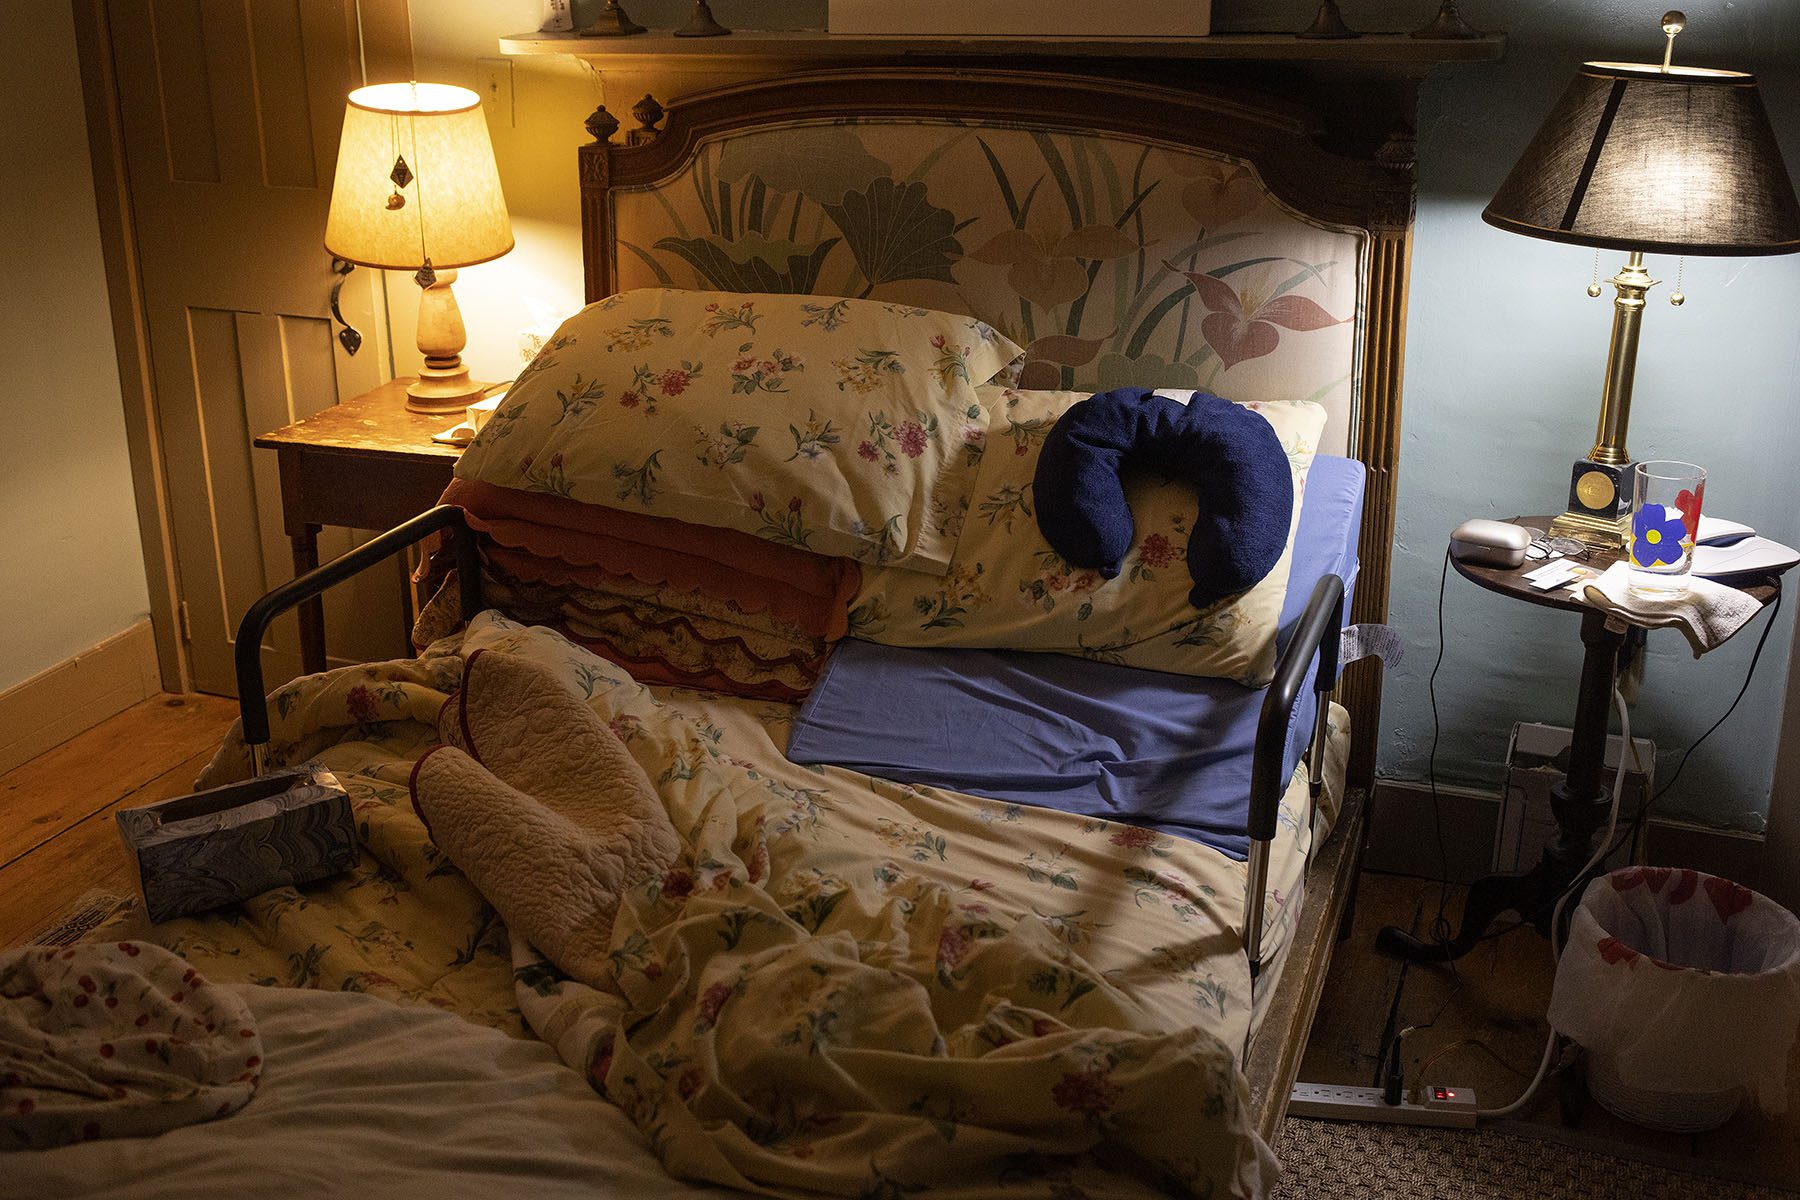 The bedroom of an elderly person is pictured. The bedsheets are undone and on the bed rests a neck pillow and a box of tissue paper that appears empty.